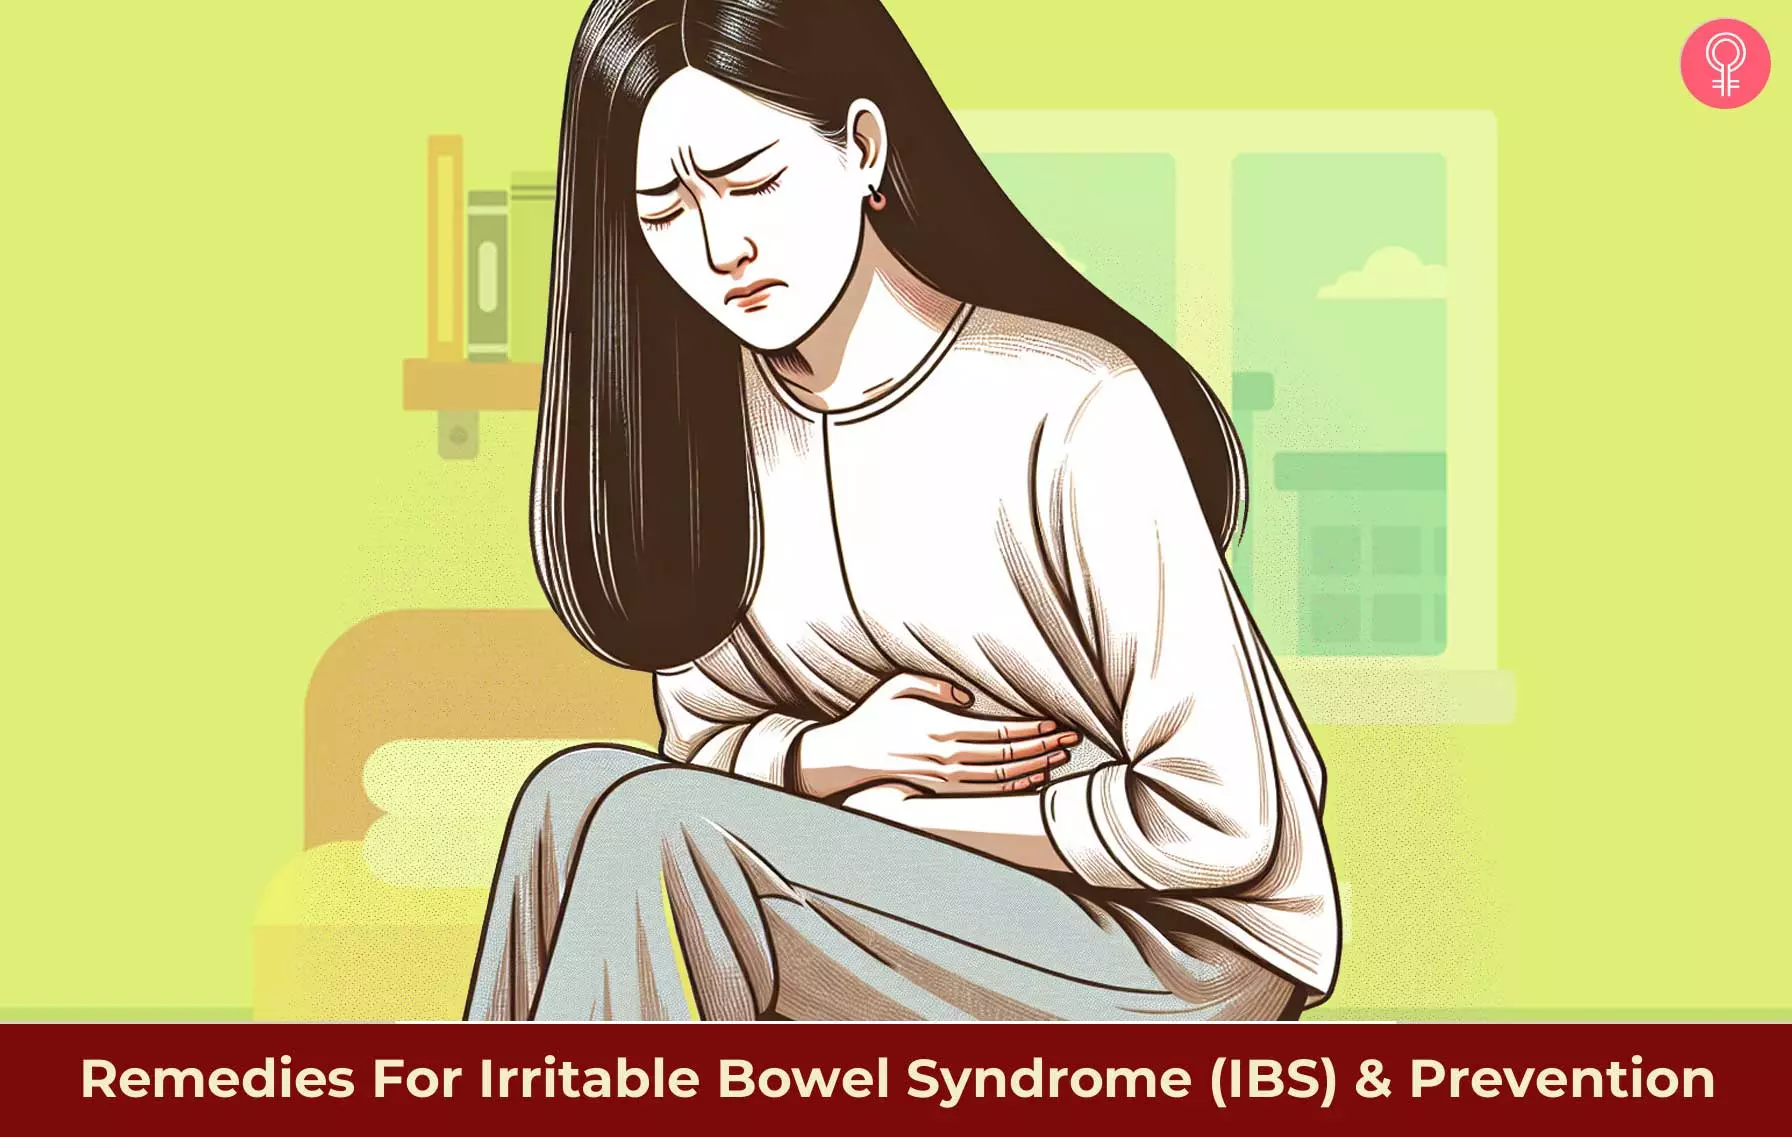 7 Remedies For Irritable Bowel Syndrome (IBS) & Prevention